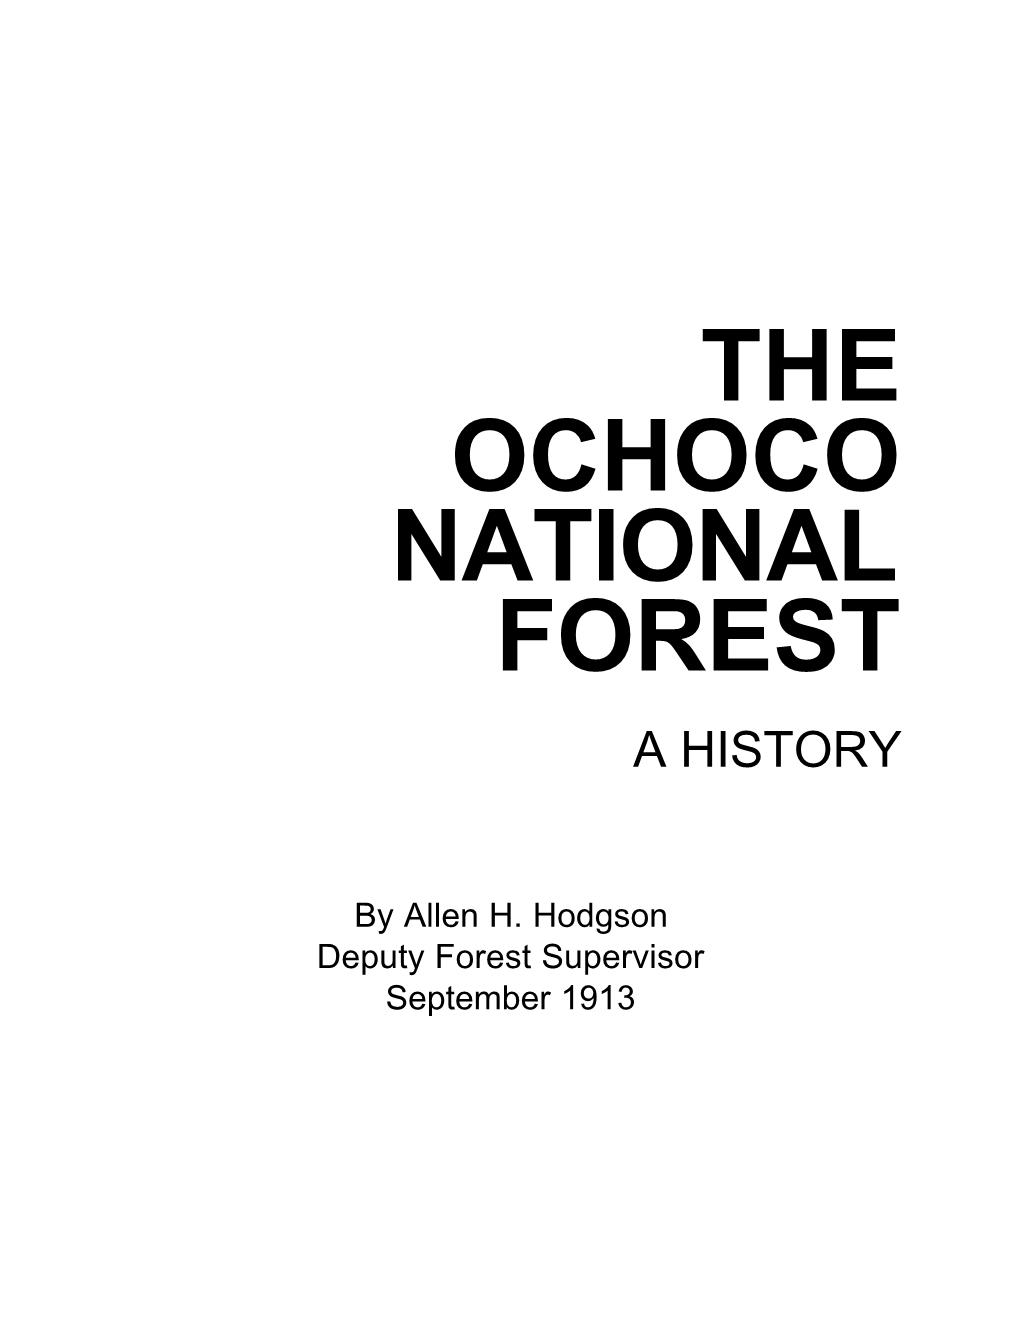 The Ochoco National Forest a History